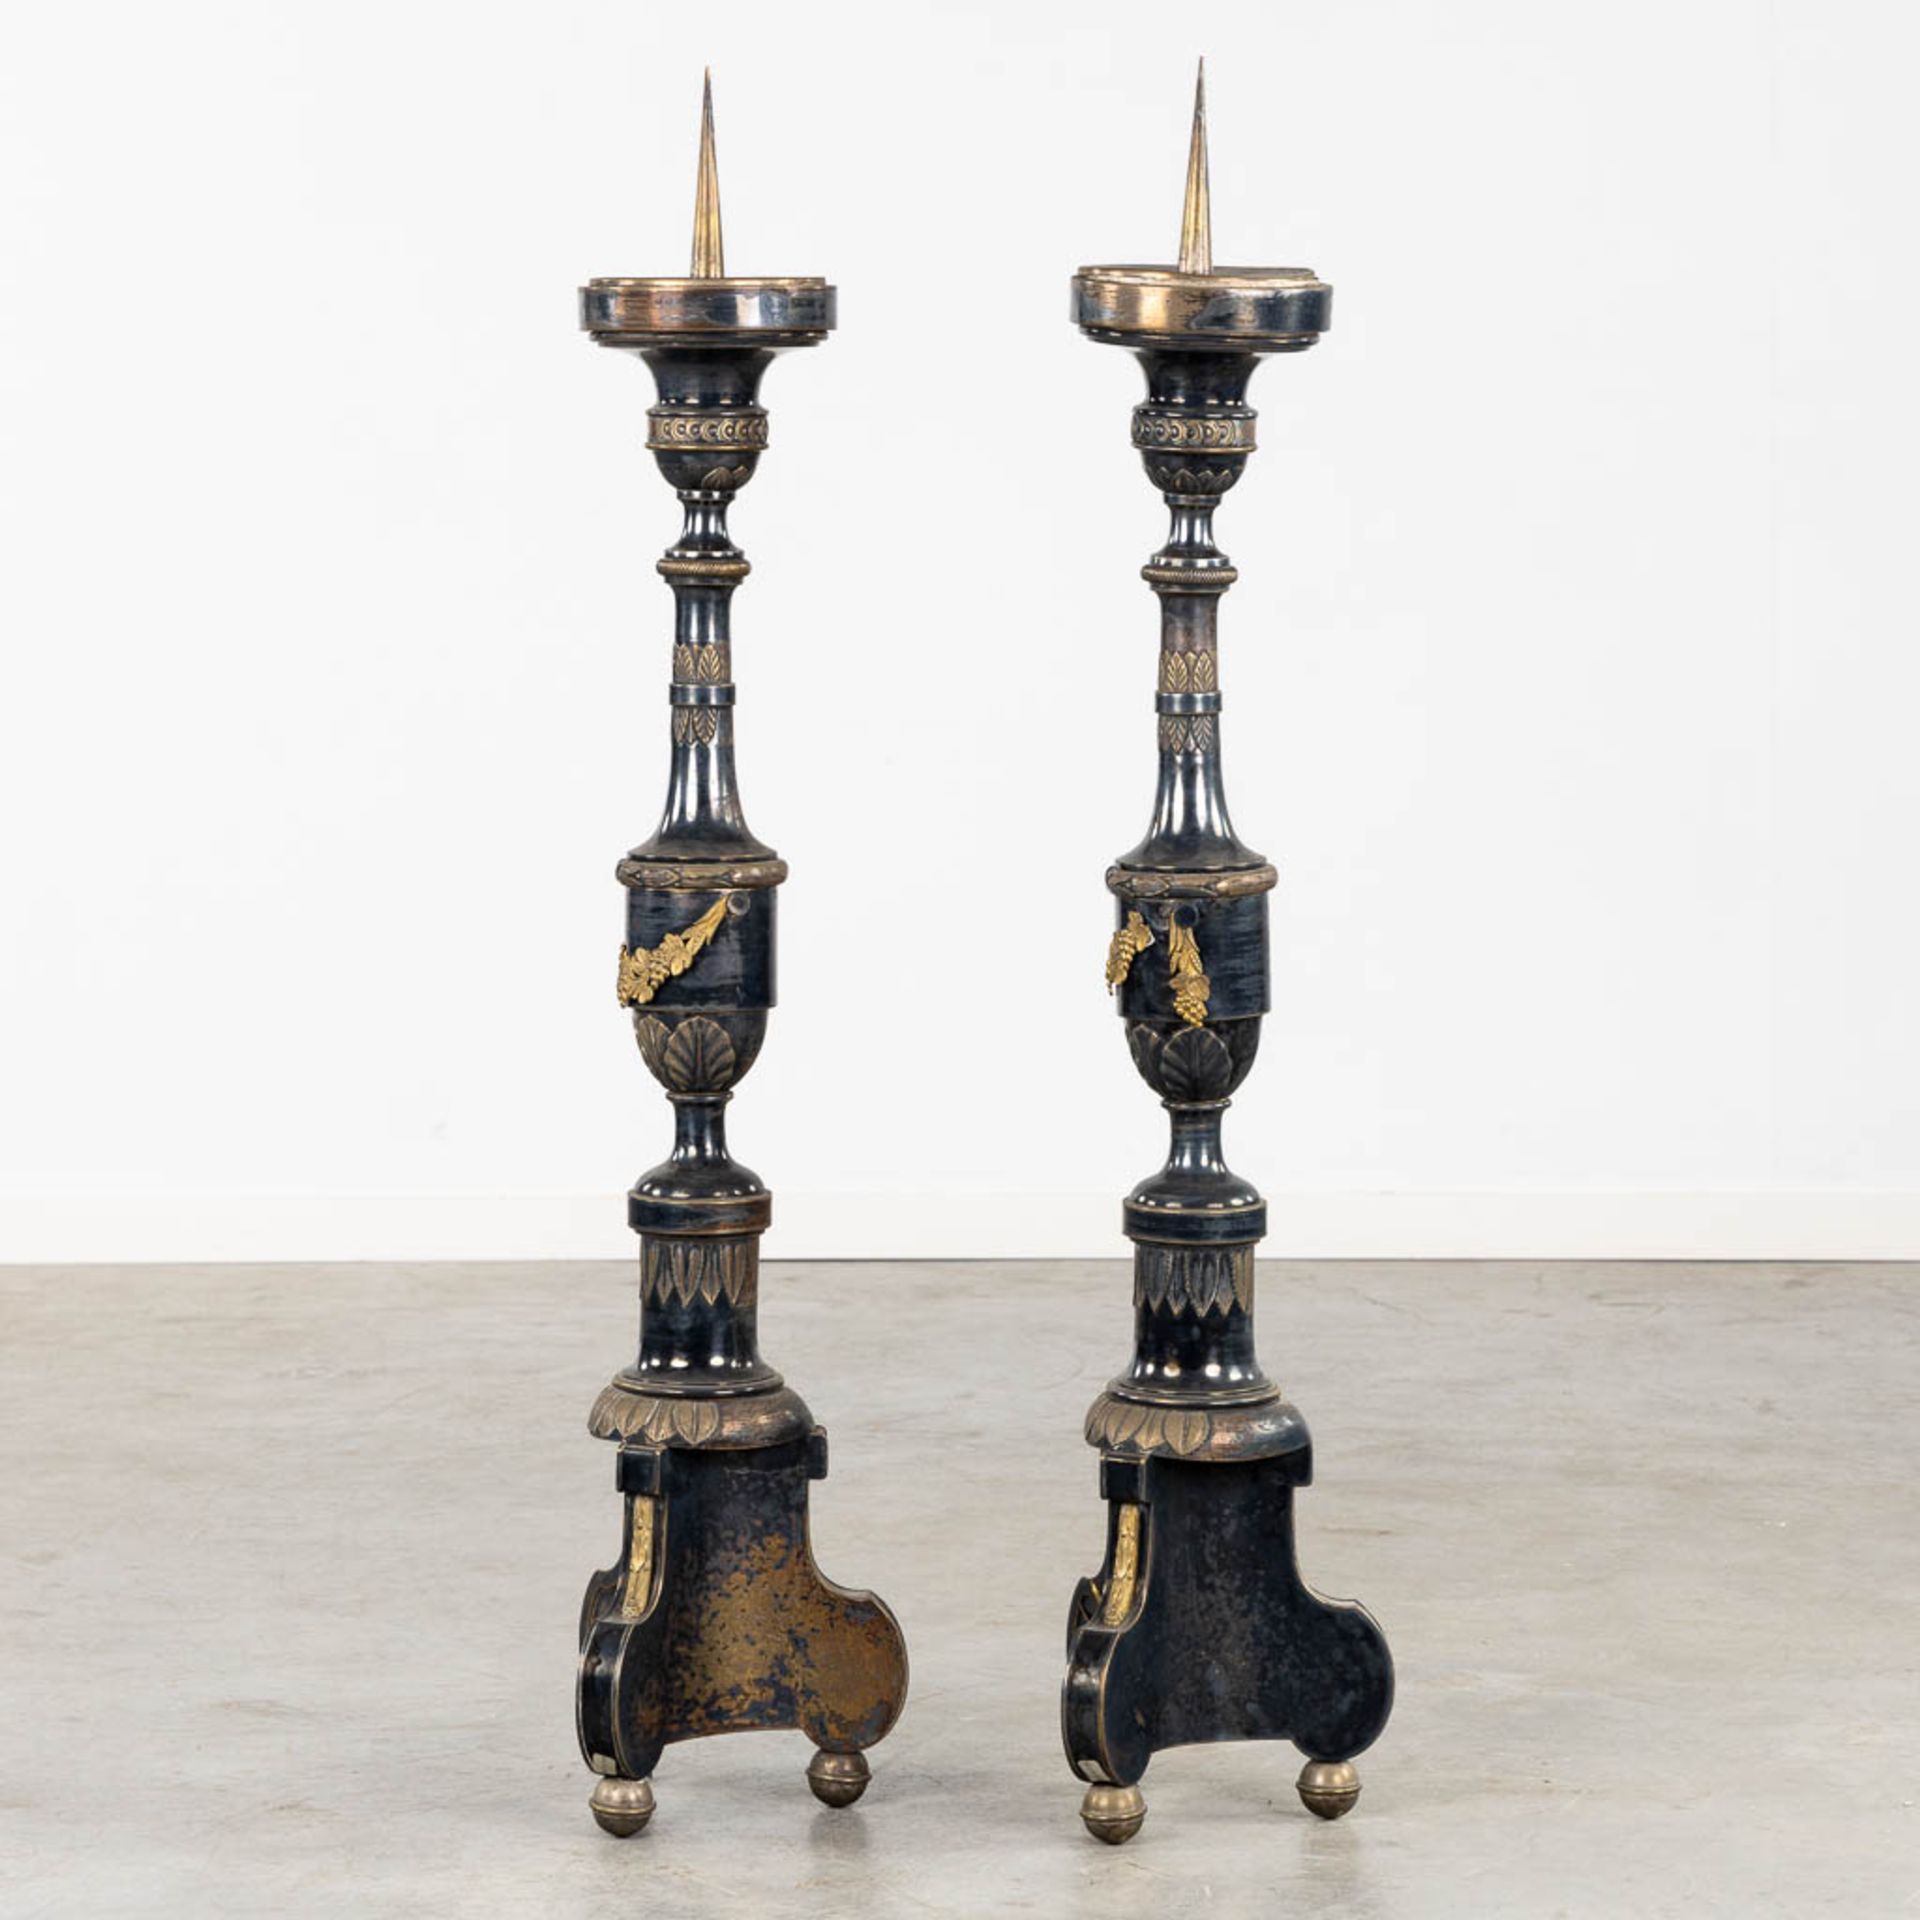 A pair of Church Candlesticks, silver- and gold-plated metal. 19th C. (H:120 cm) - Image 5 of 9